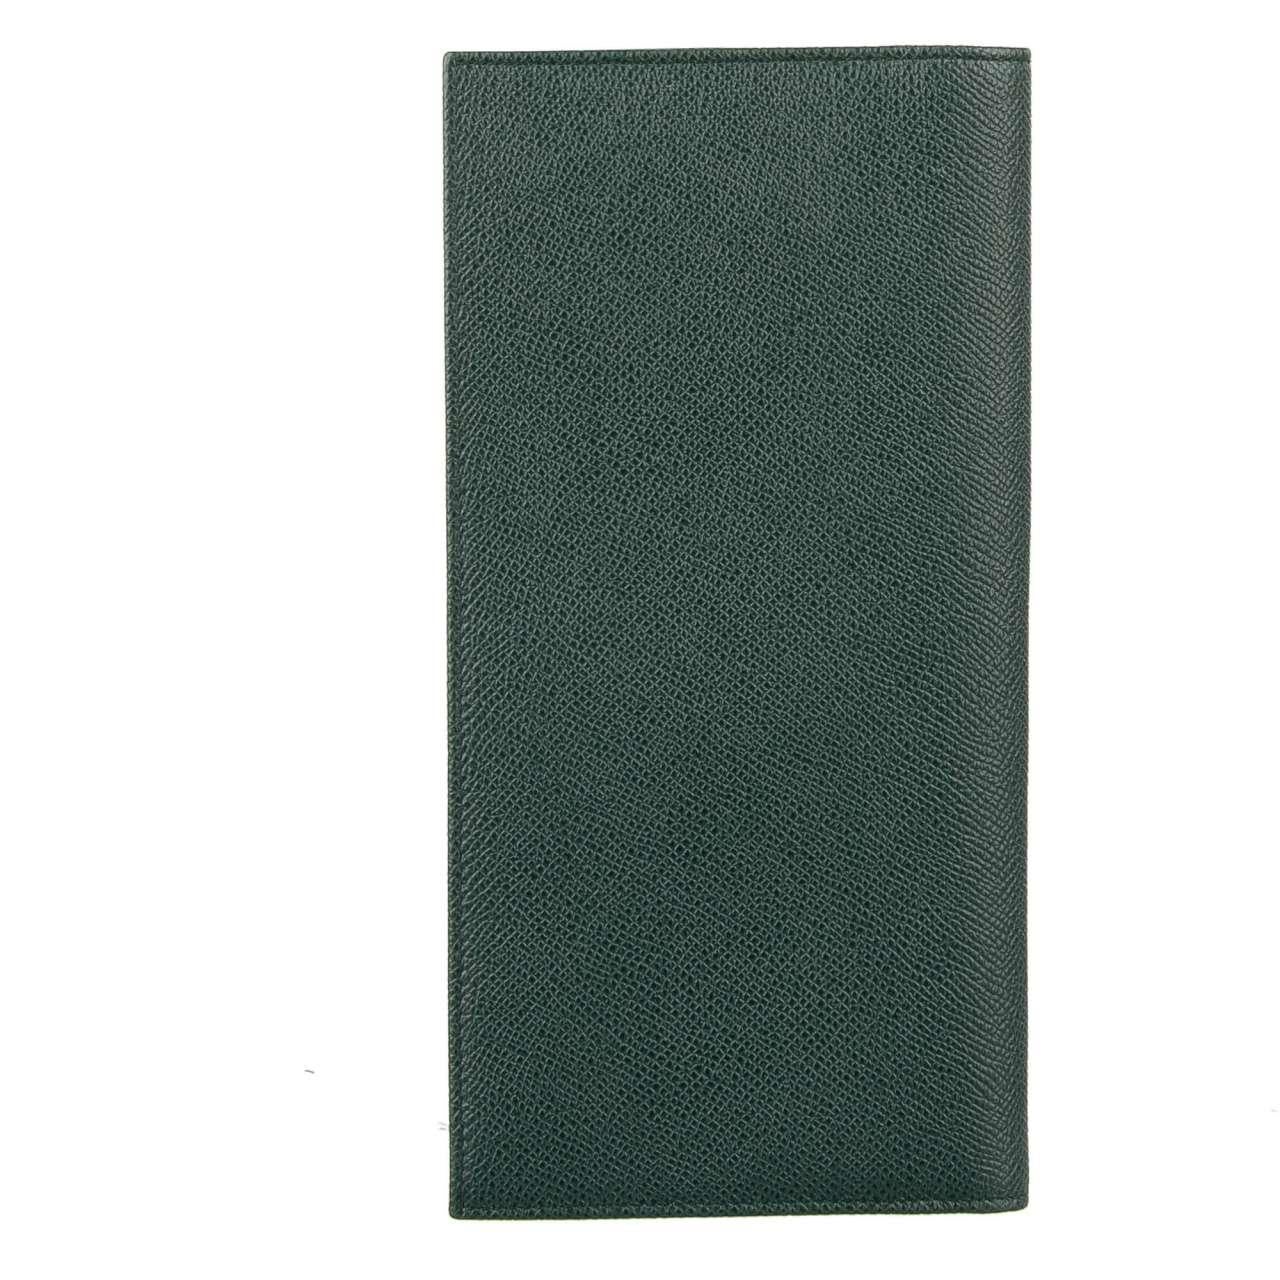 - Large dauphine leather bifold document holder / wallet with many pockets and slots and DG logo plate in green by DOLCE & GABBANA - New with Tag and Authenticity Card - MADE IN ITALY - Former RRP: EUR 425 - Model: BP2032-A1001-87399 - Material: